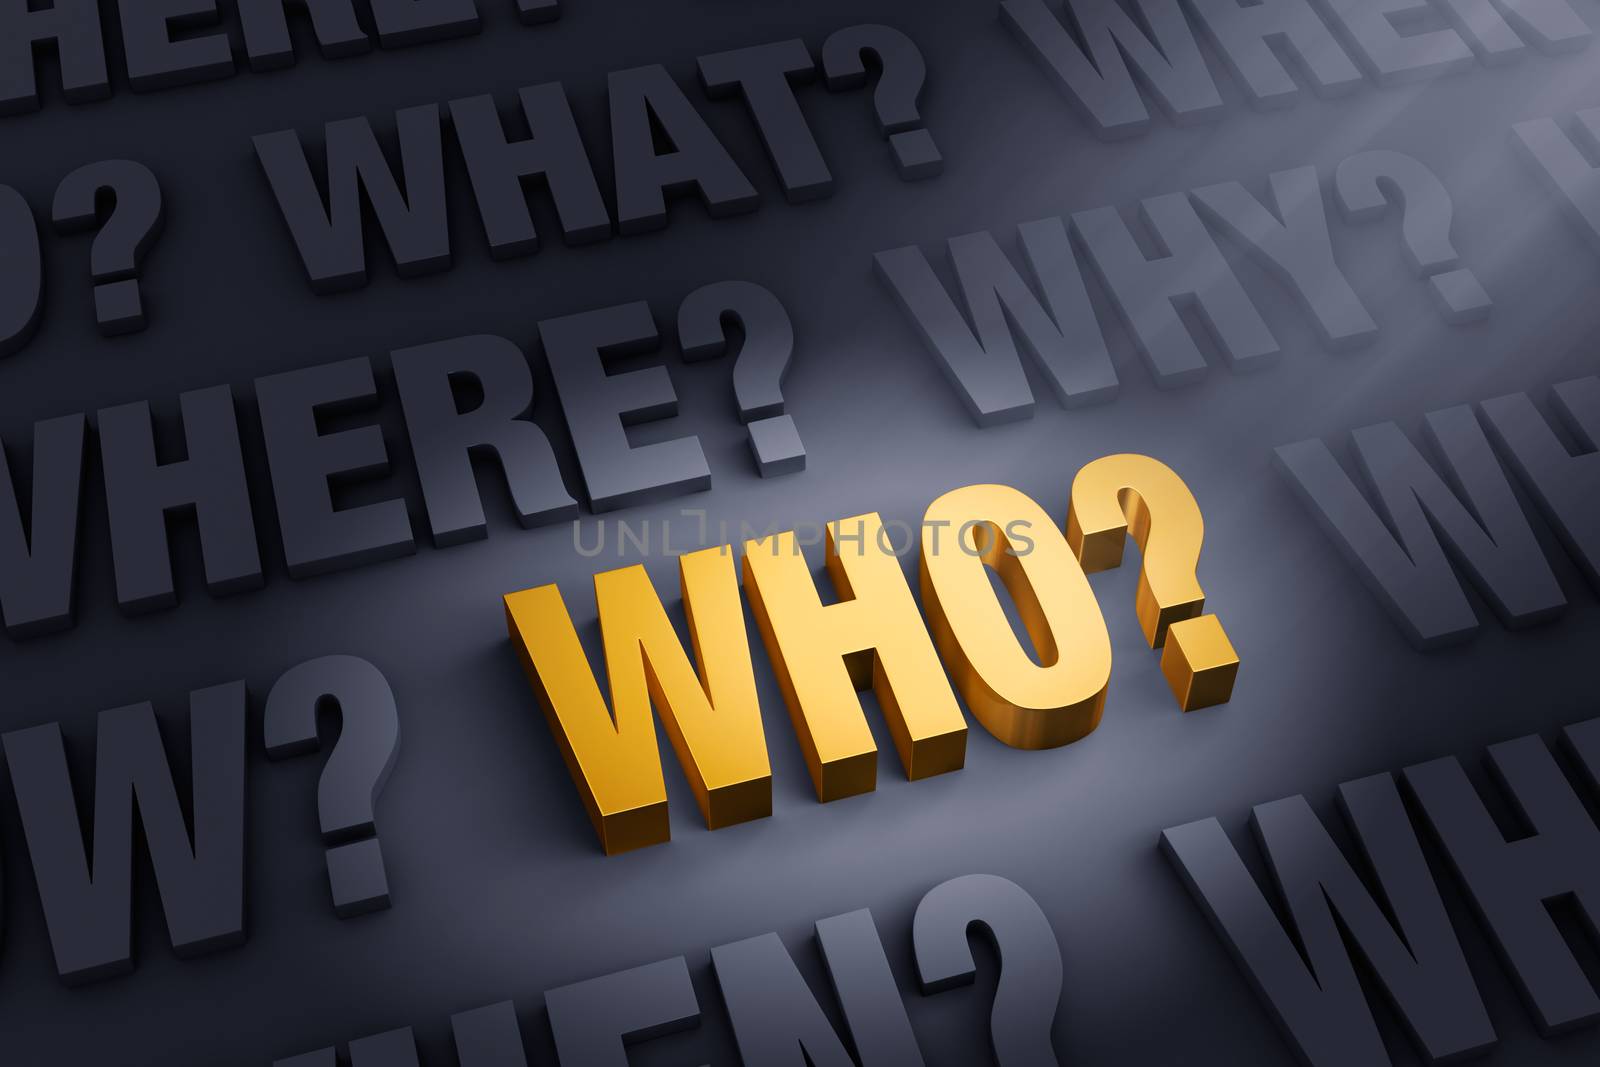 A spotlight illuminates a bright, gold "WHO?" on a dark background filled with "WHAT?", "WHERE?", "WHEN?", "HOW?", and "WHY?" 
